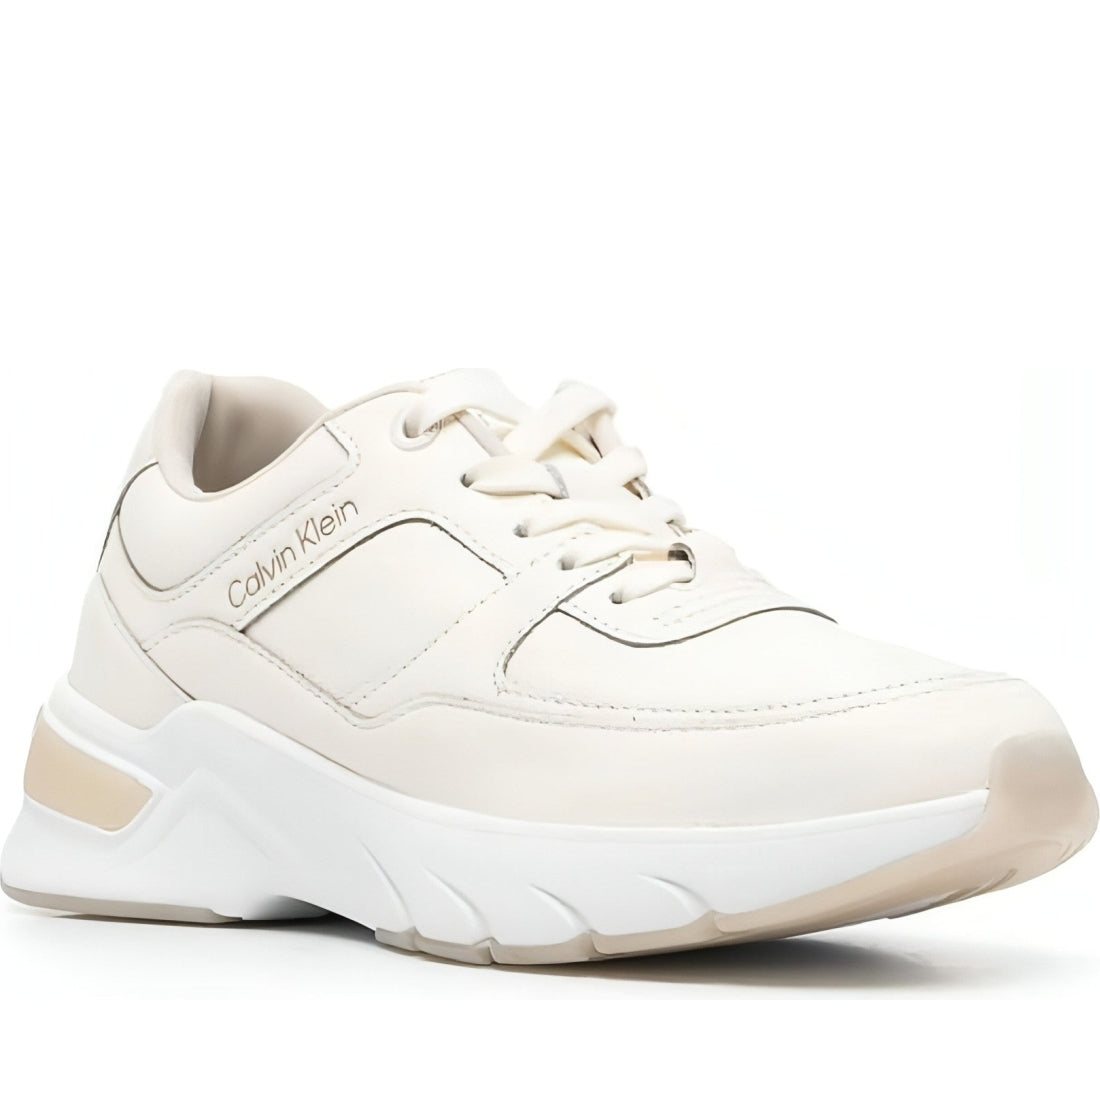 CALVIN KLEIN womens marshmallow, gray elevated lace up trainers | Vilbury London